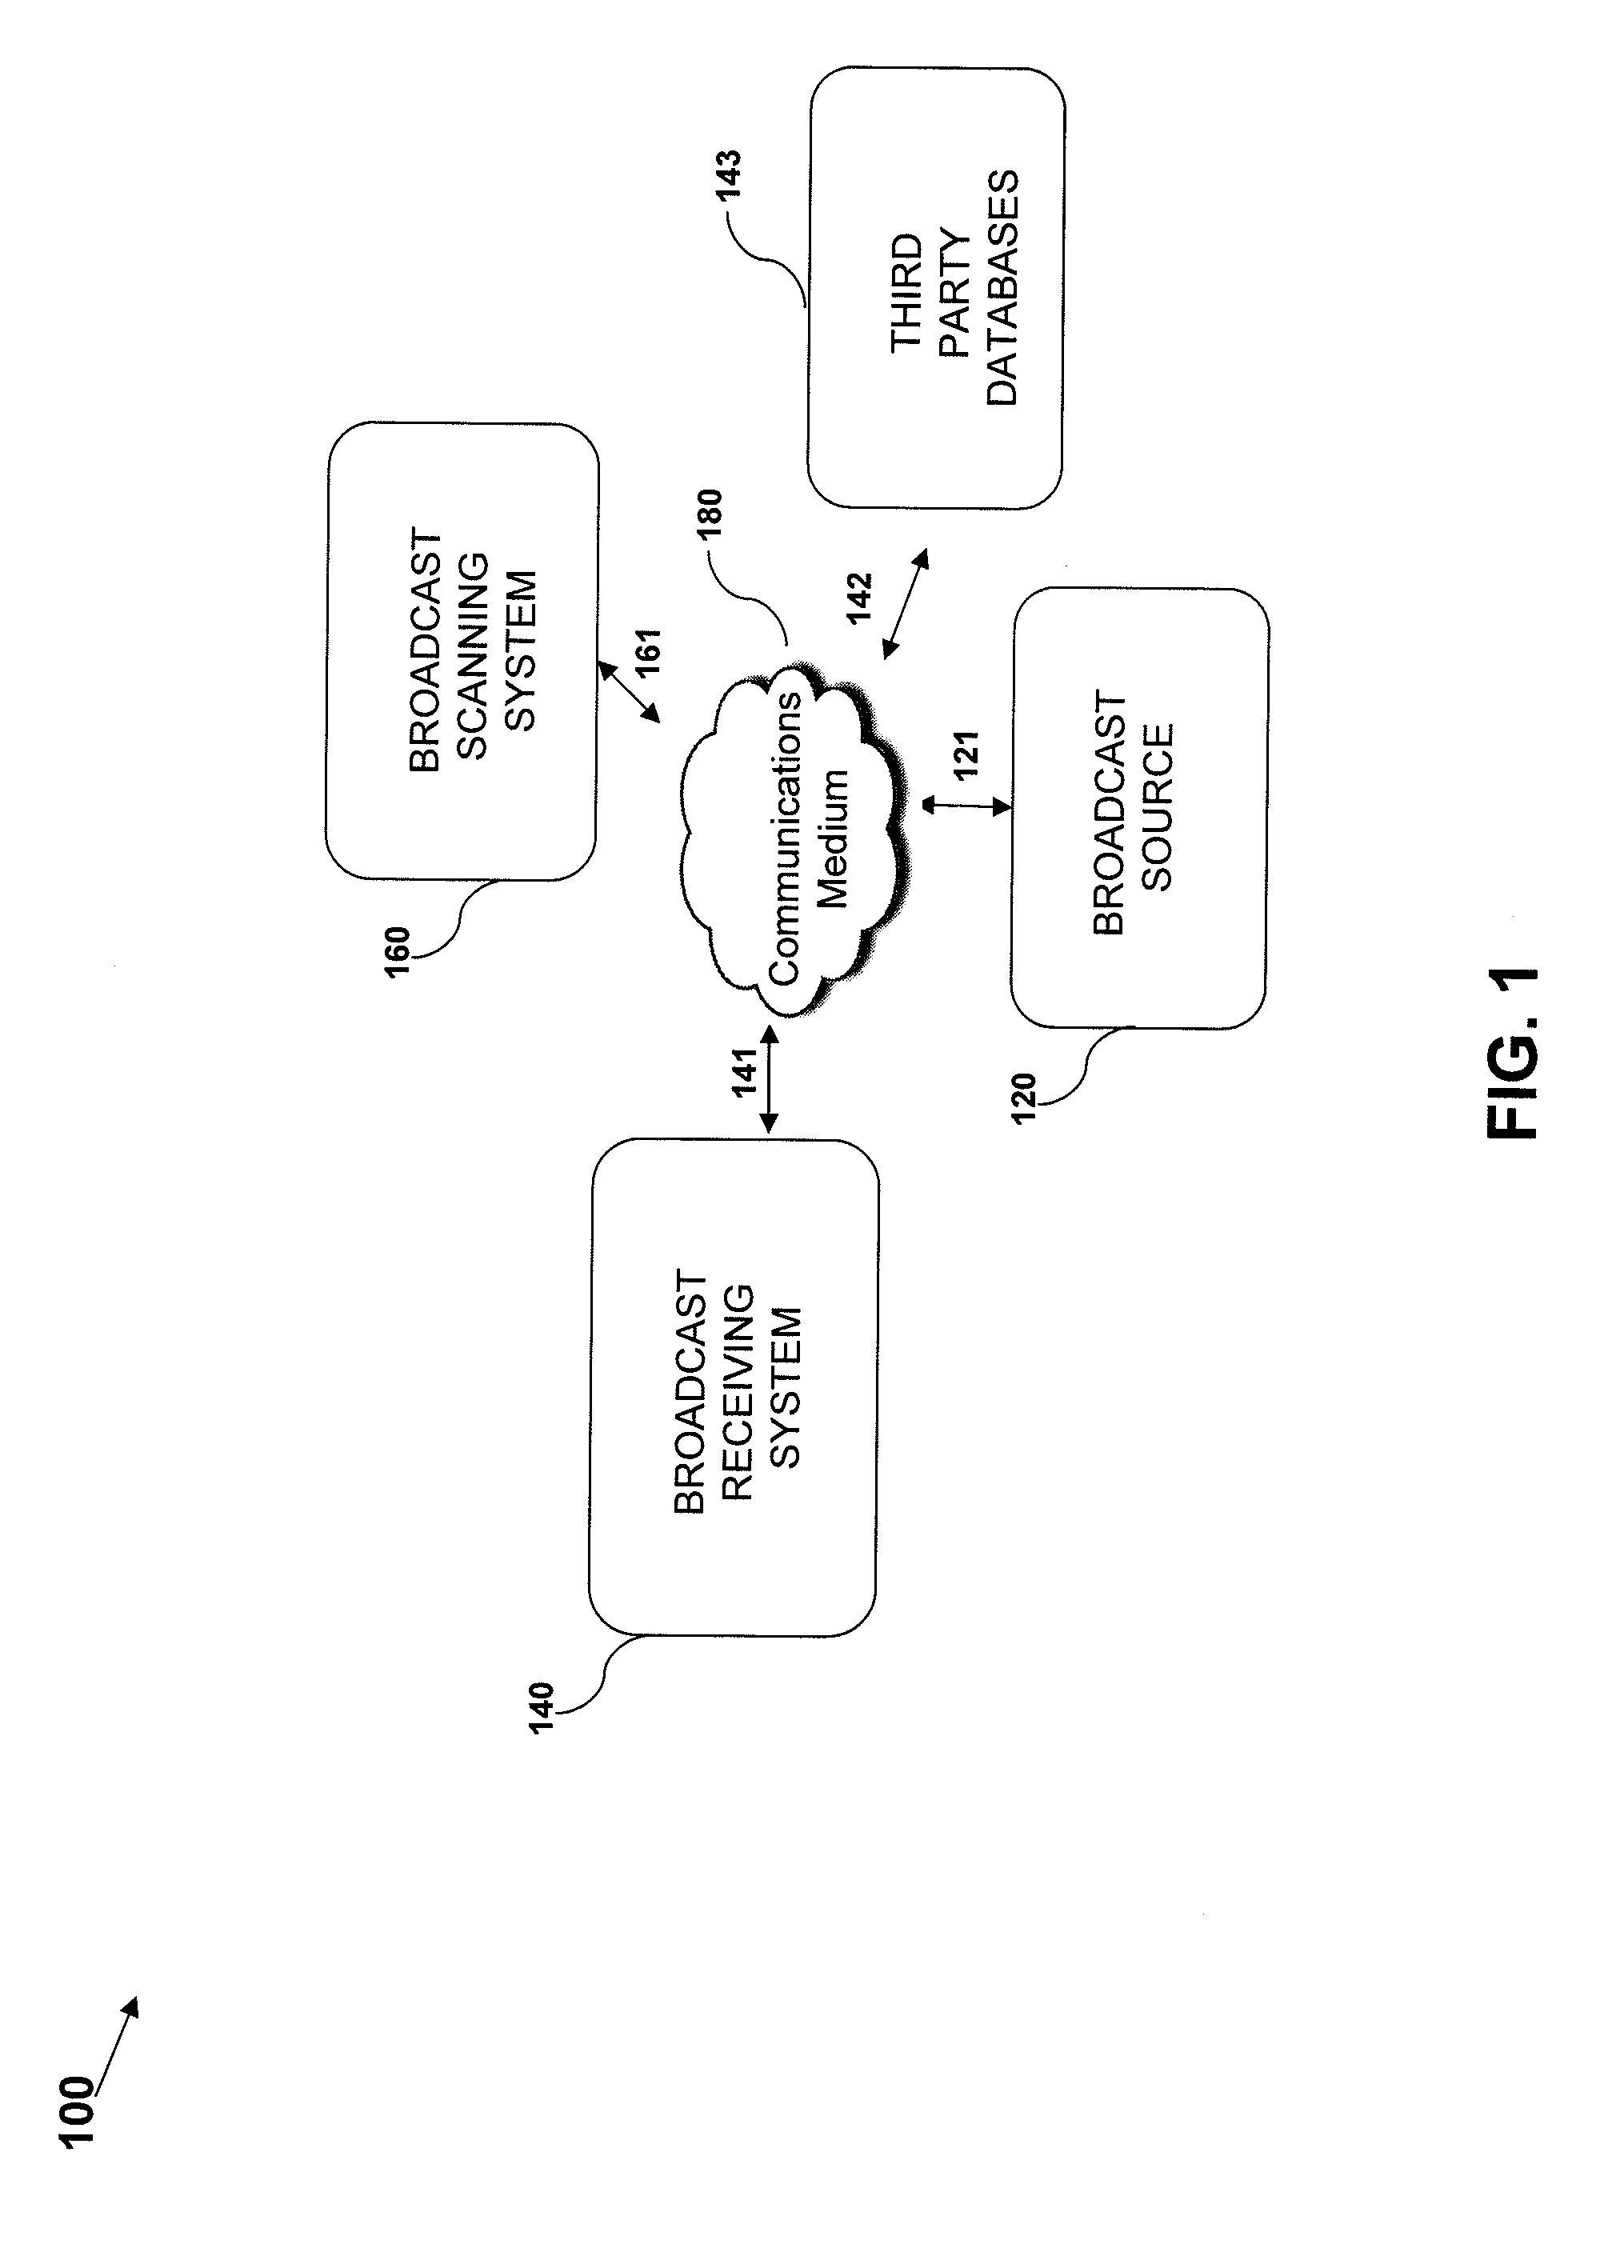 Systems, methods, and devices for scanning broadcasts